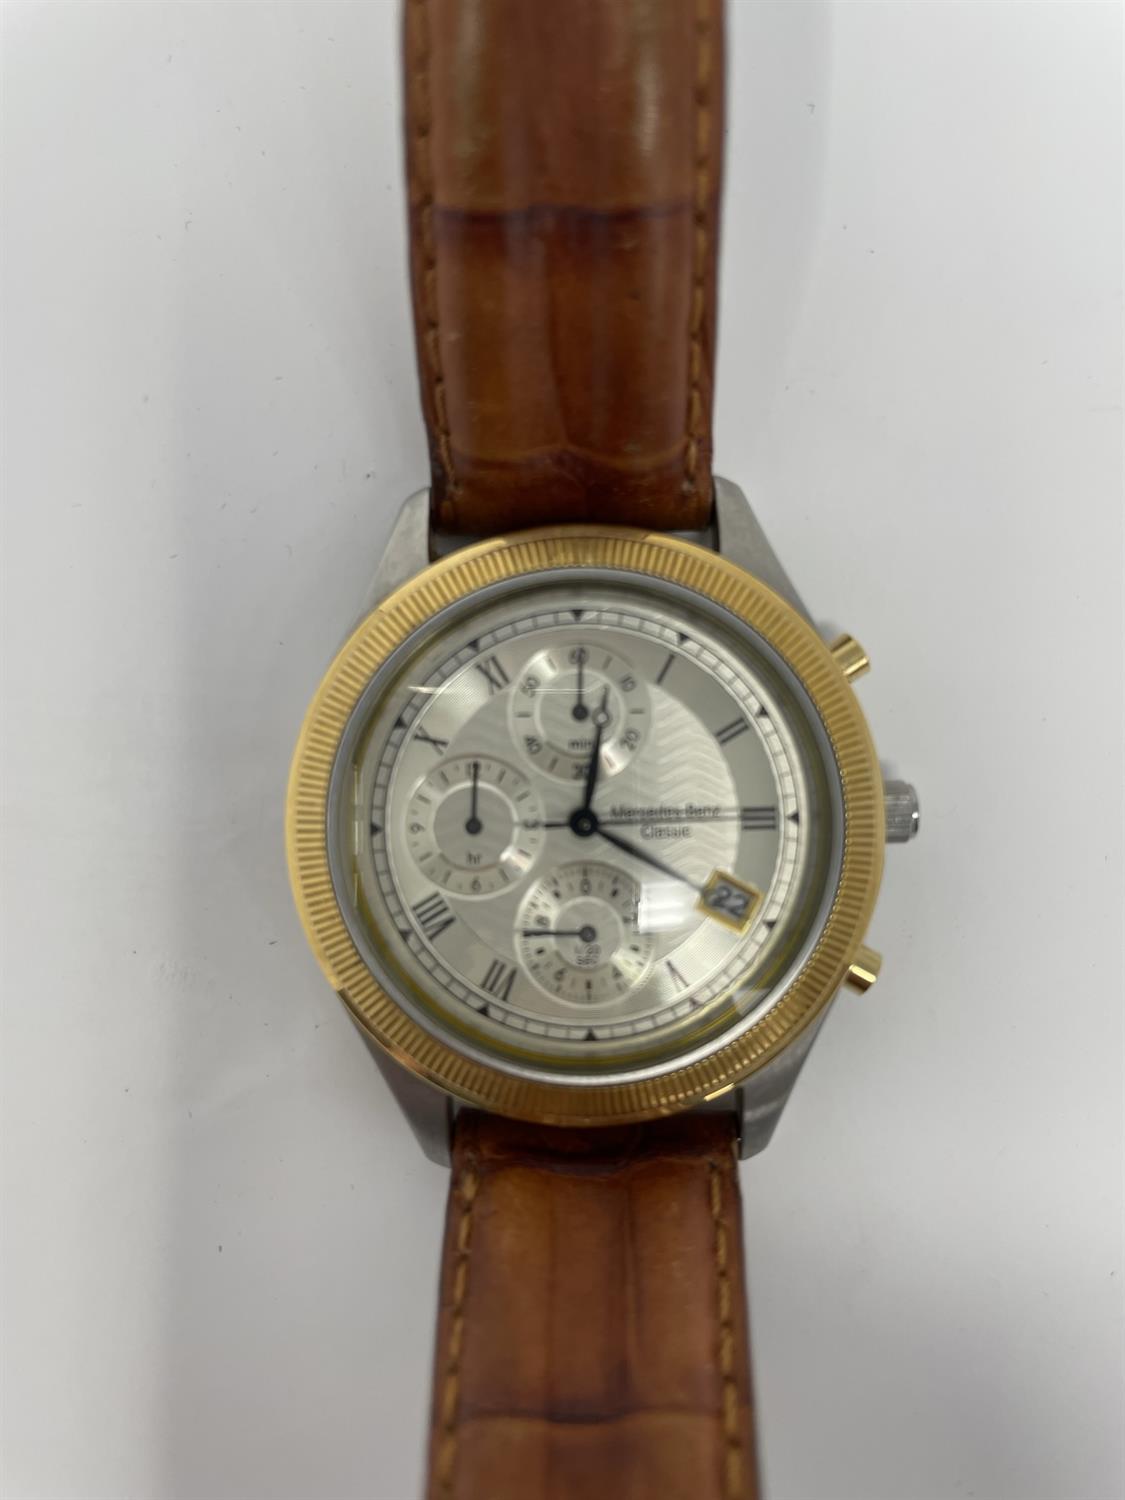 Mercedes-Benz Classic Chronograph - Image 6 of 10